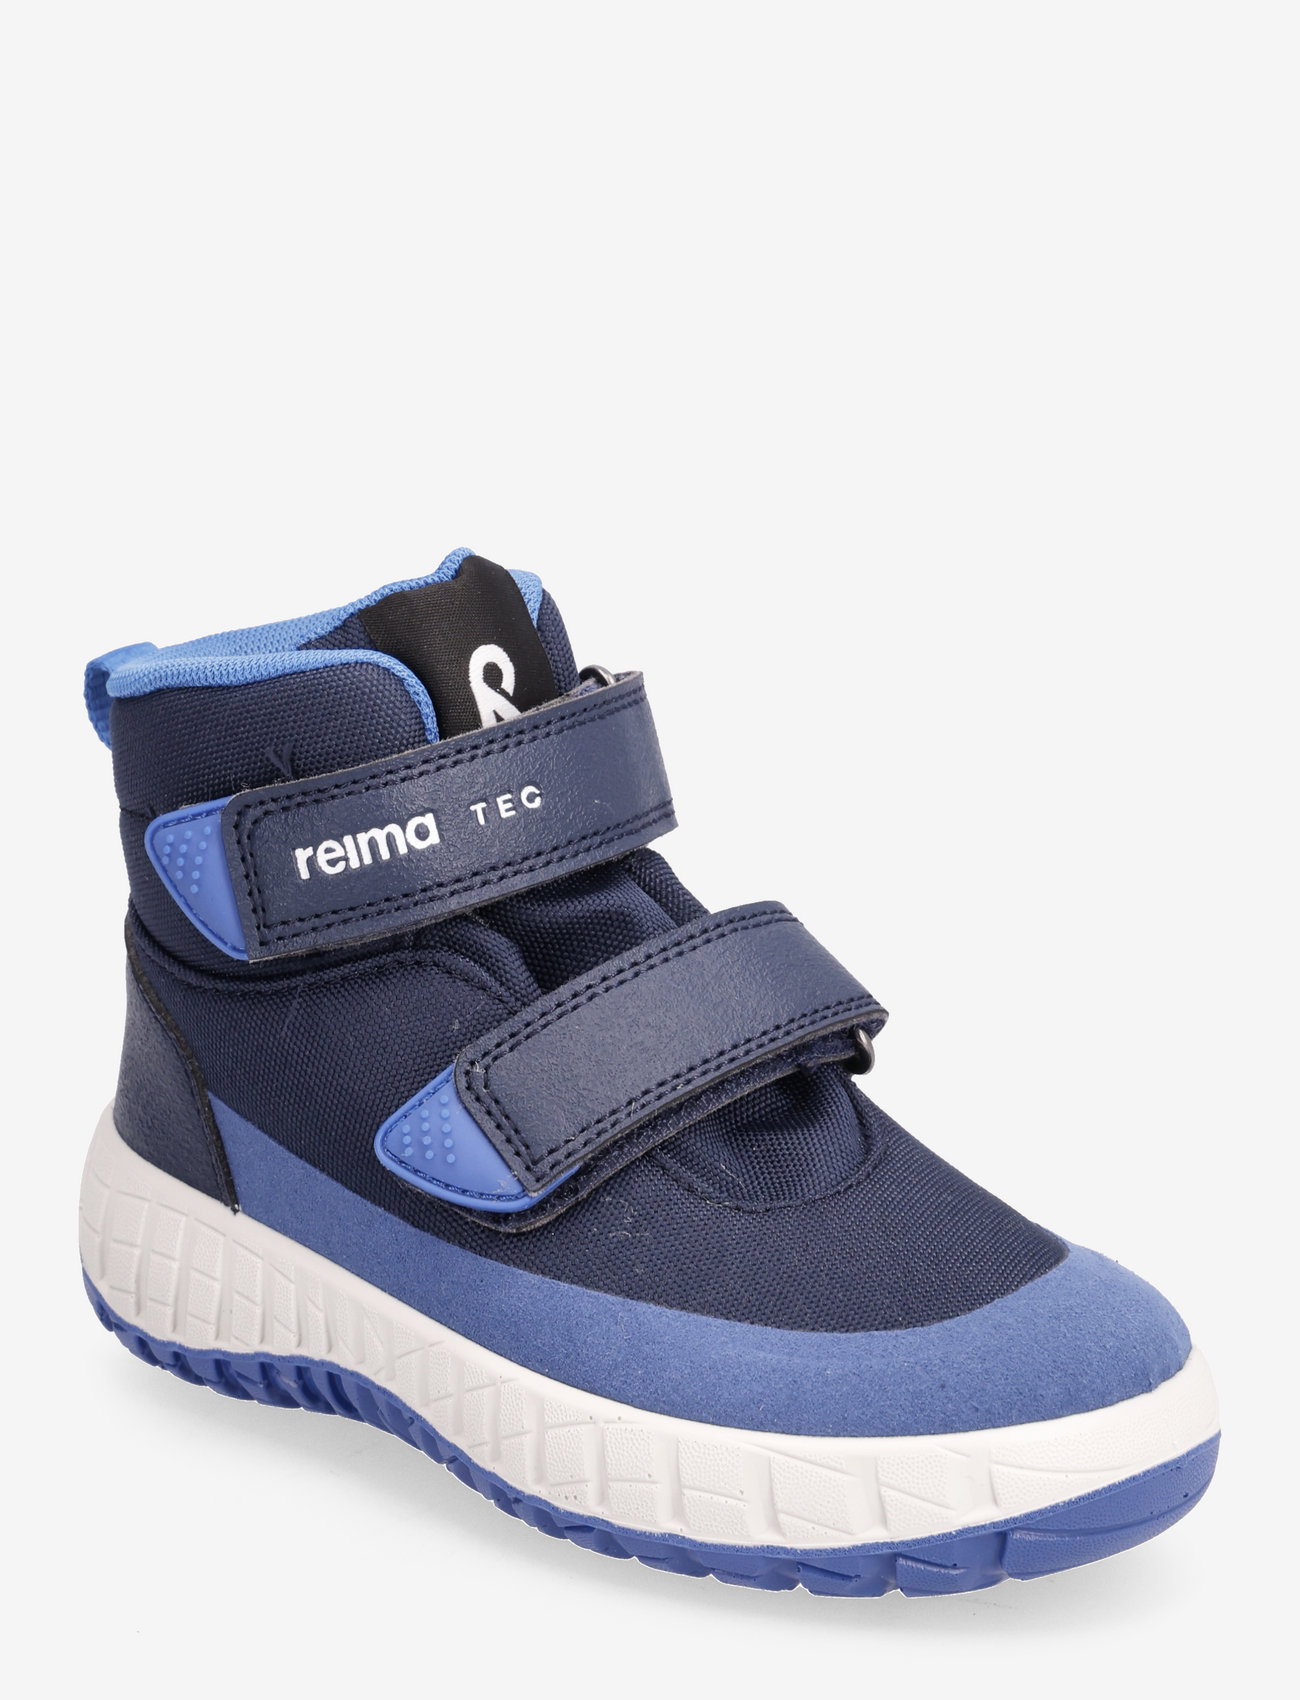 Reima - Reimatec shoes, Patter 2.0 - high tops - navy - 0